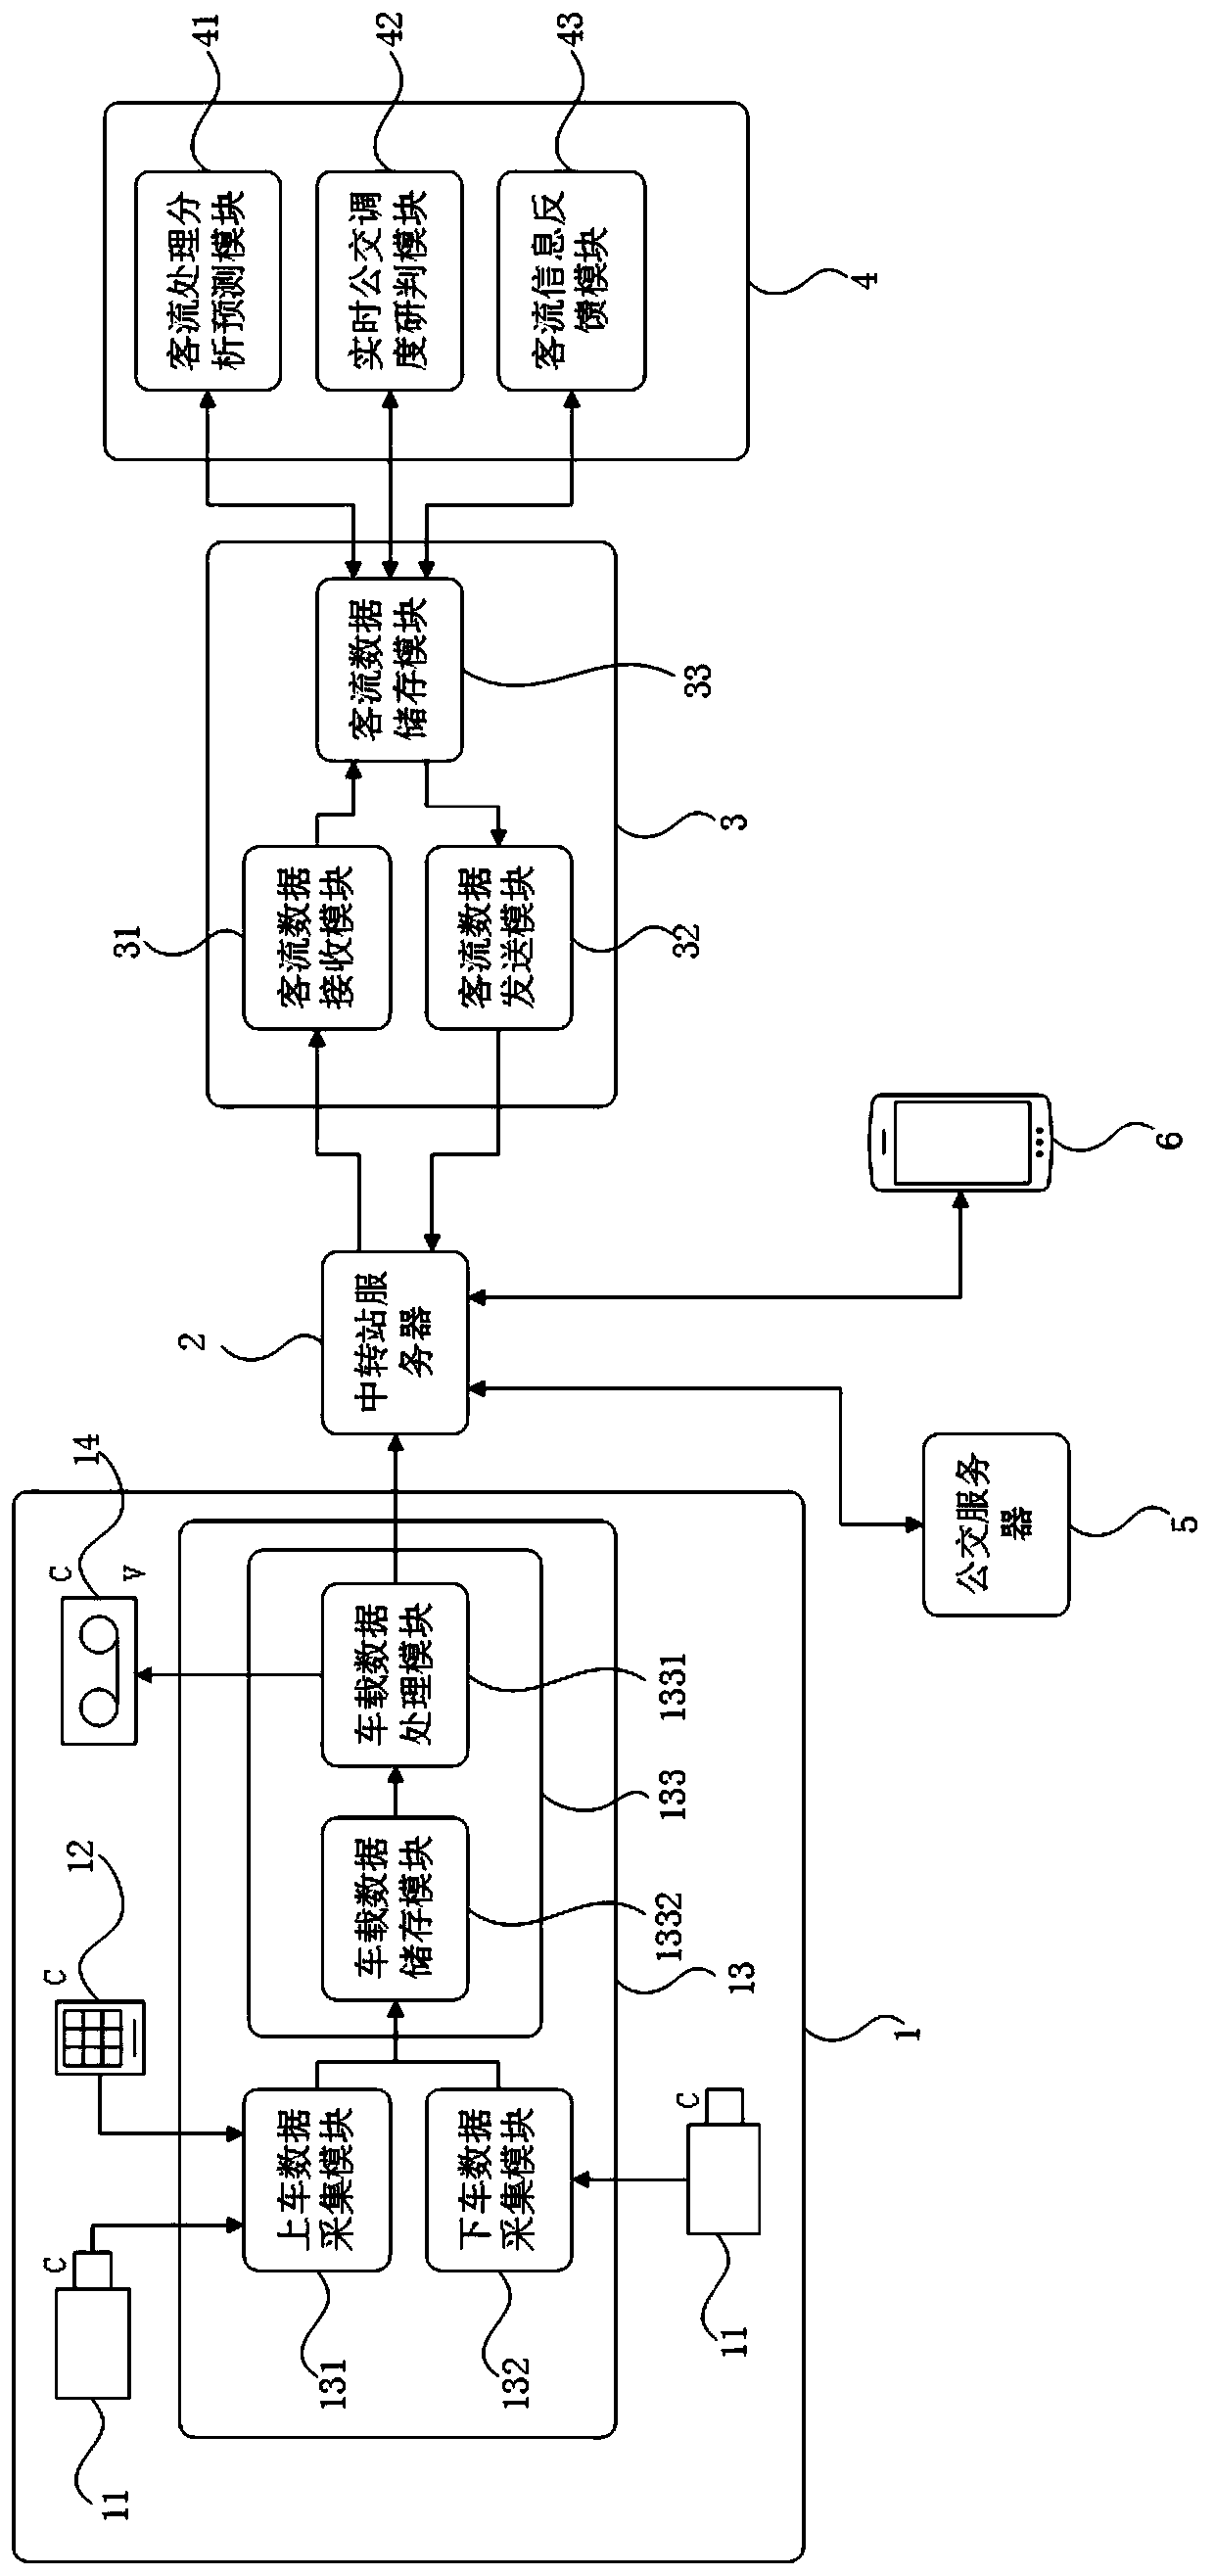 Public passenger flow monitoring and analyzing system and method